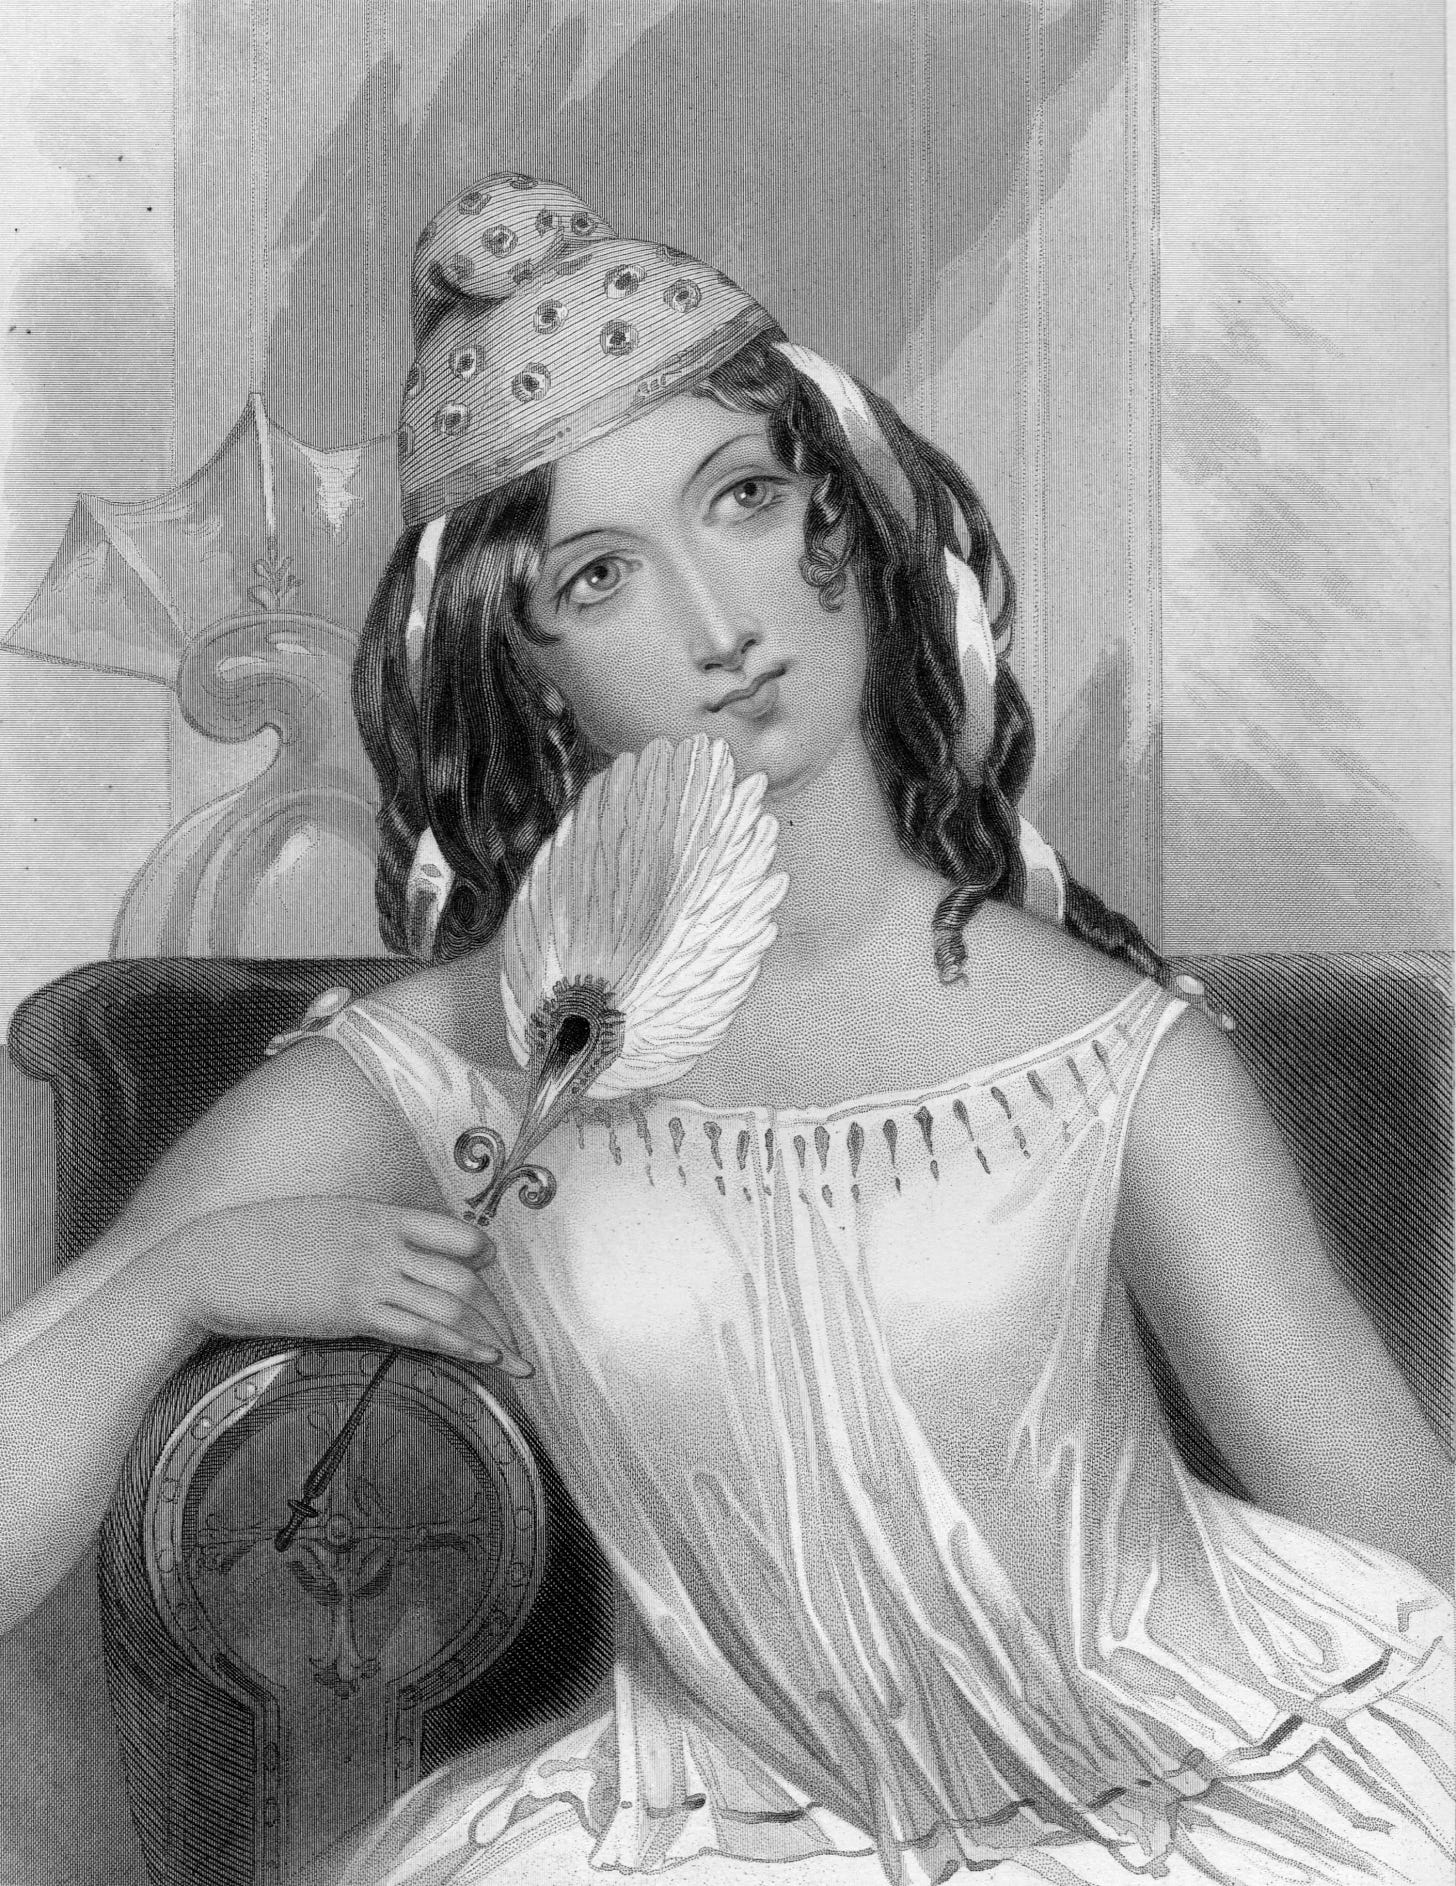 A Victorian etching of a woman in ancient Greek-style clothing leaning against the arm of her chair. She holds a feathered fan to her mouth as she gazes thoughtfully up and away from the viewer.